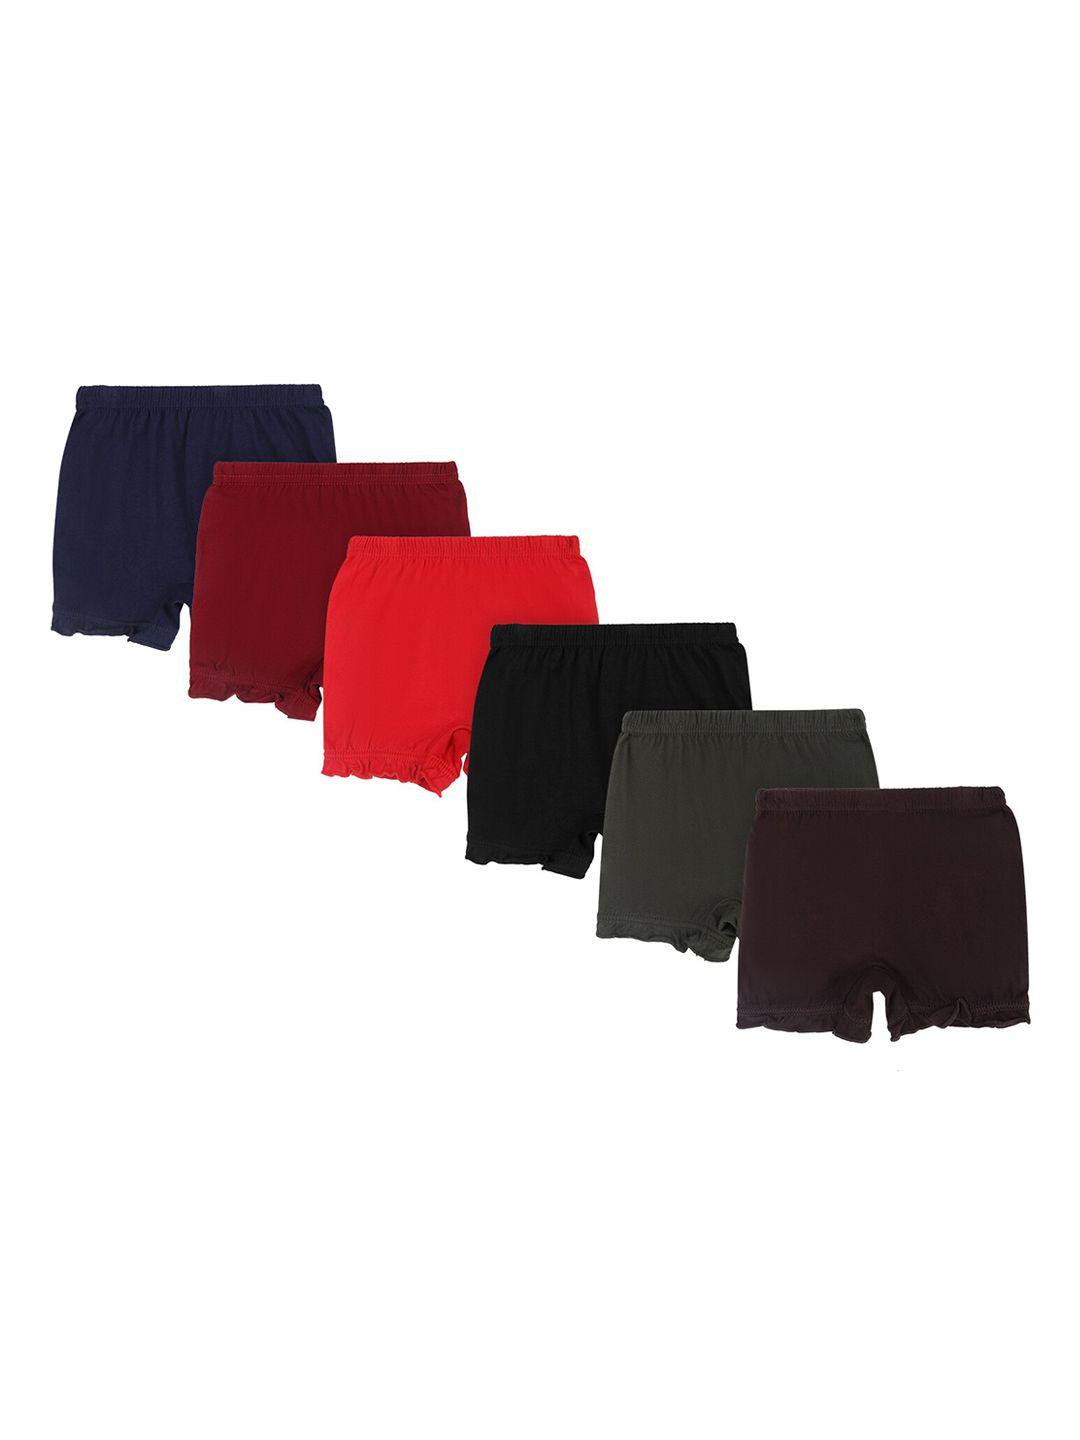 dyca pack of 6 kids assorted solid cotton briefs